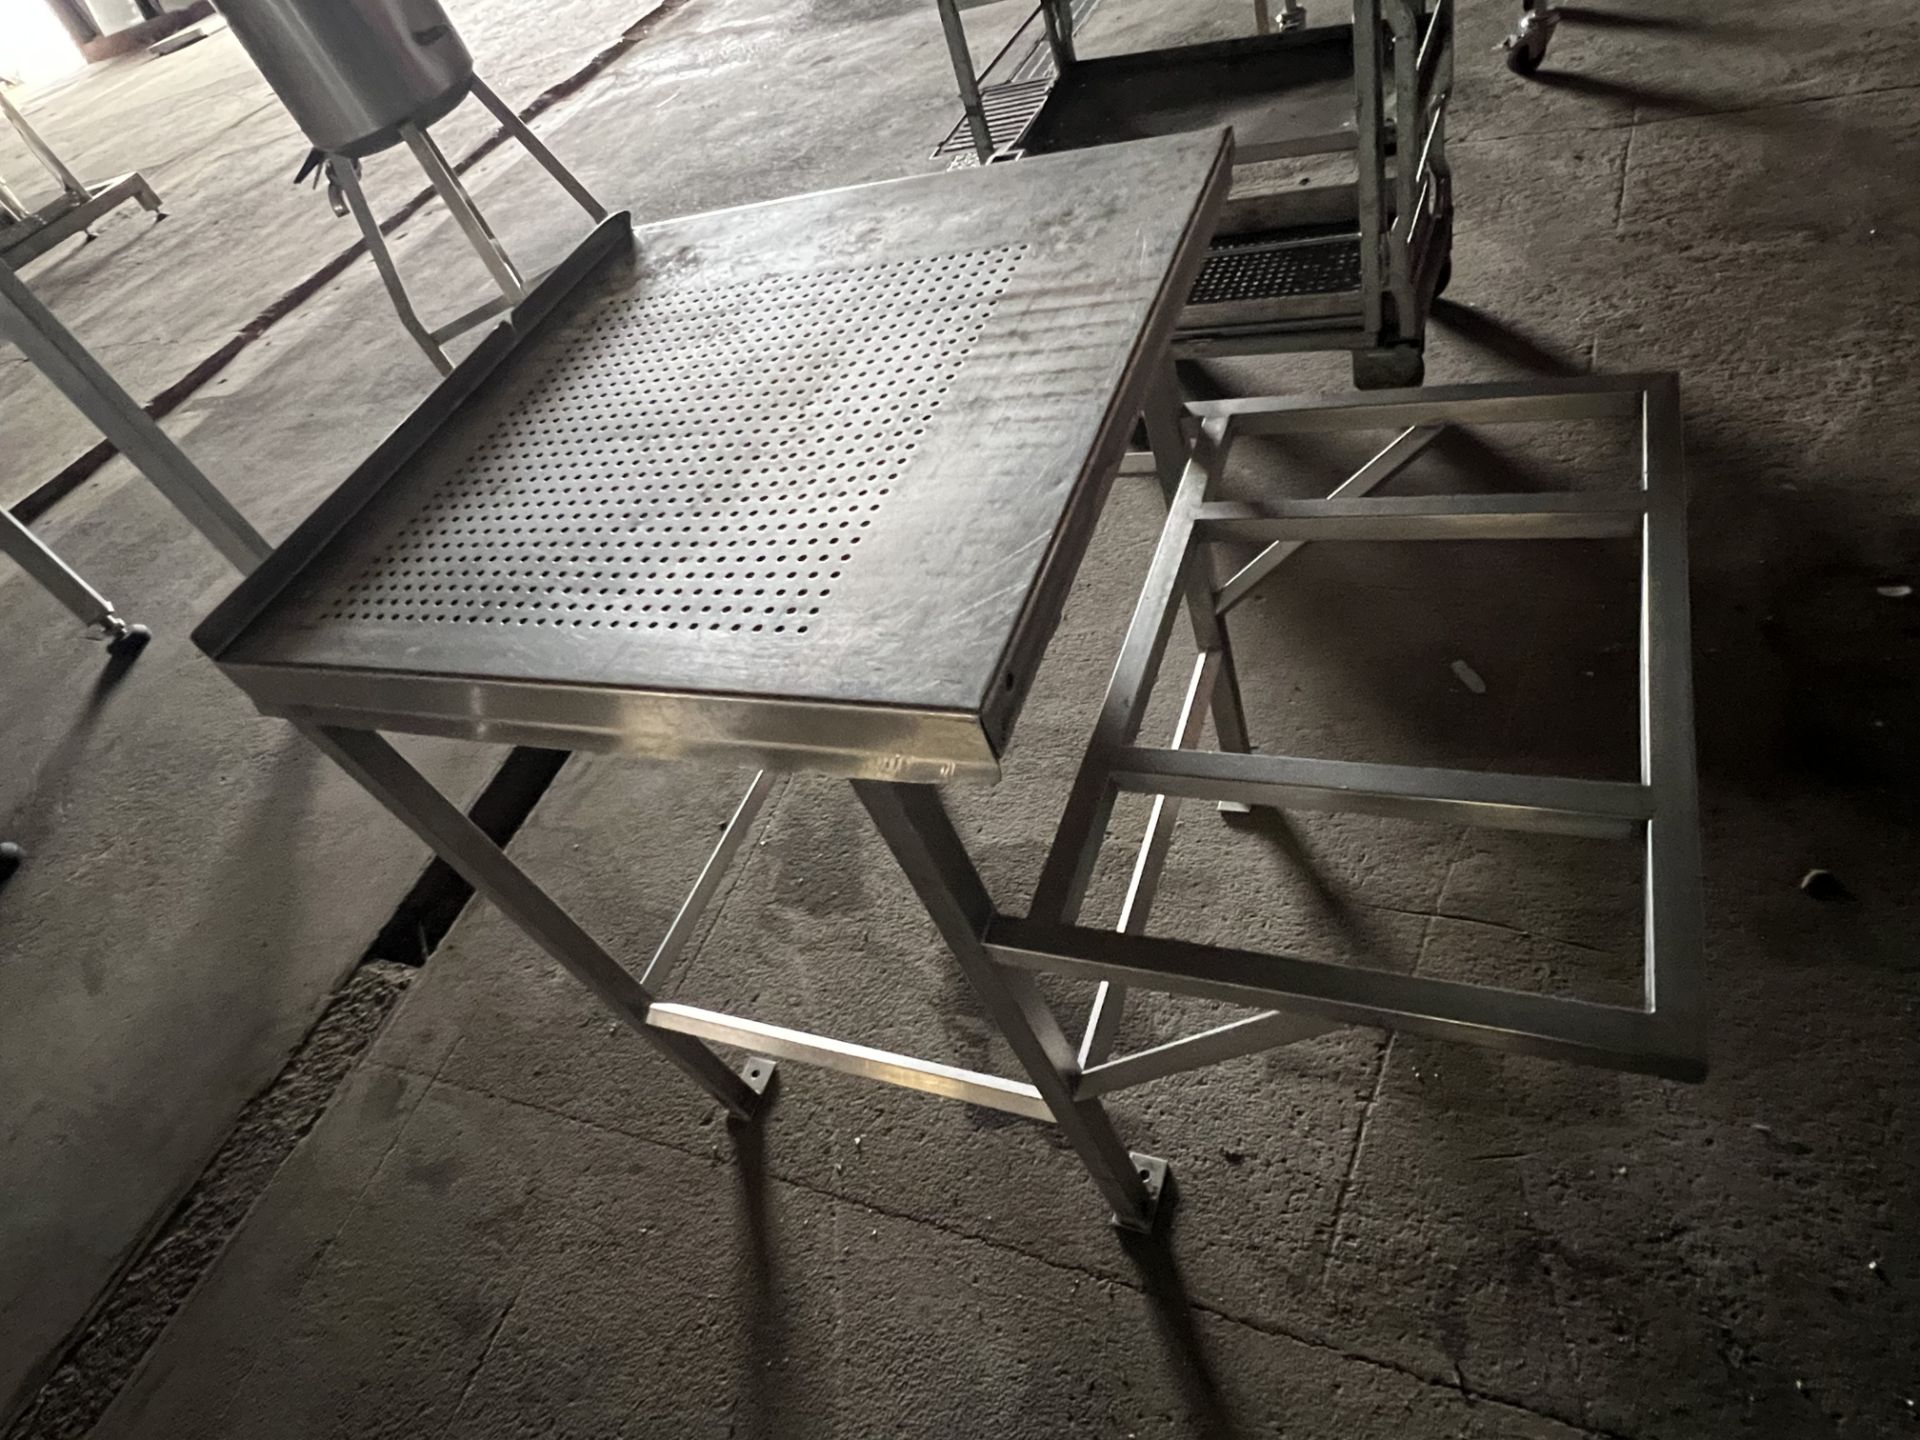 Draining Table, with perforated top and fluted underneath, with shelf tray, approx. 90cm x 60cm x - Image 2 of 3